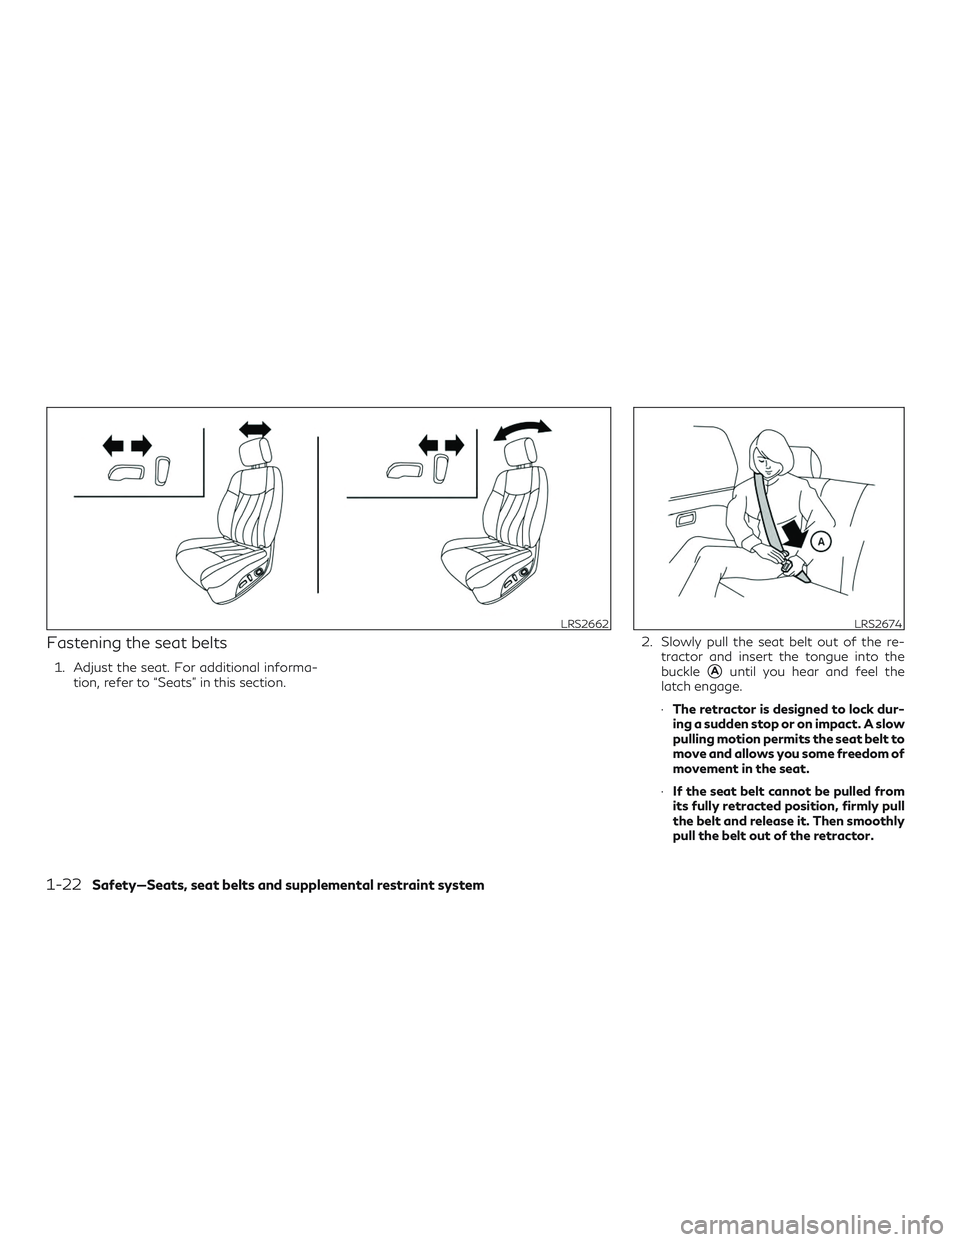 INFINITI QX60 2019 Service Manual Fastening the seat belts
1. Adjust the seat. For additional informa-tion, refer to “Seats” in this section. 2. Slowly pull the seat belt out of the re-
tractor and insert the tongue into the
buckl